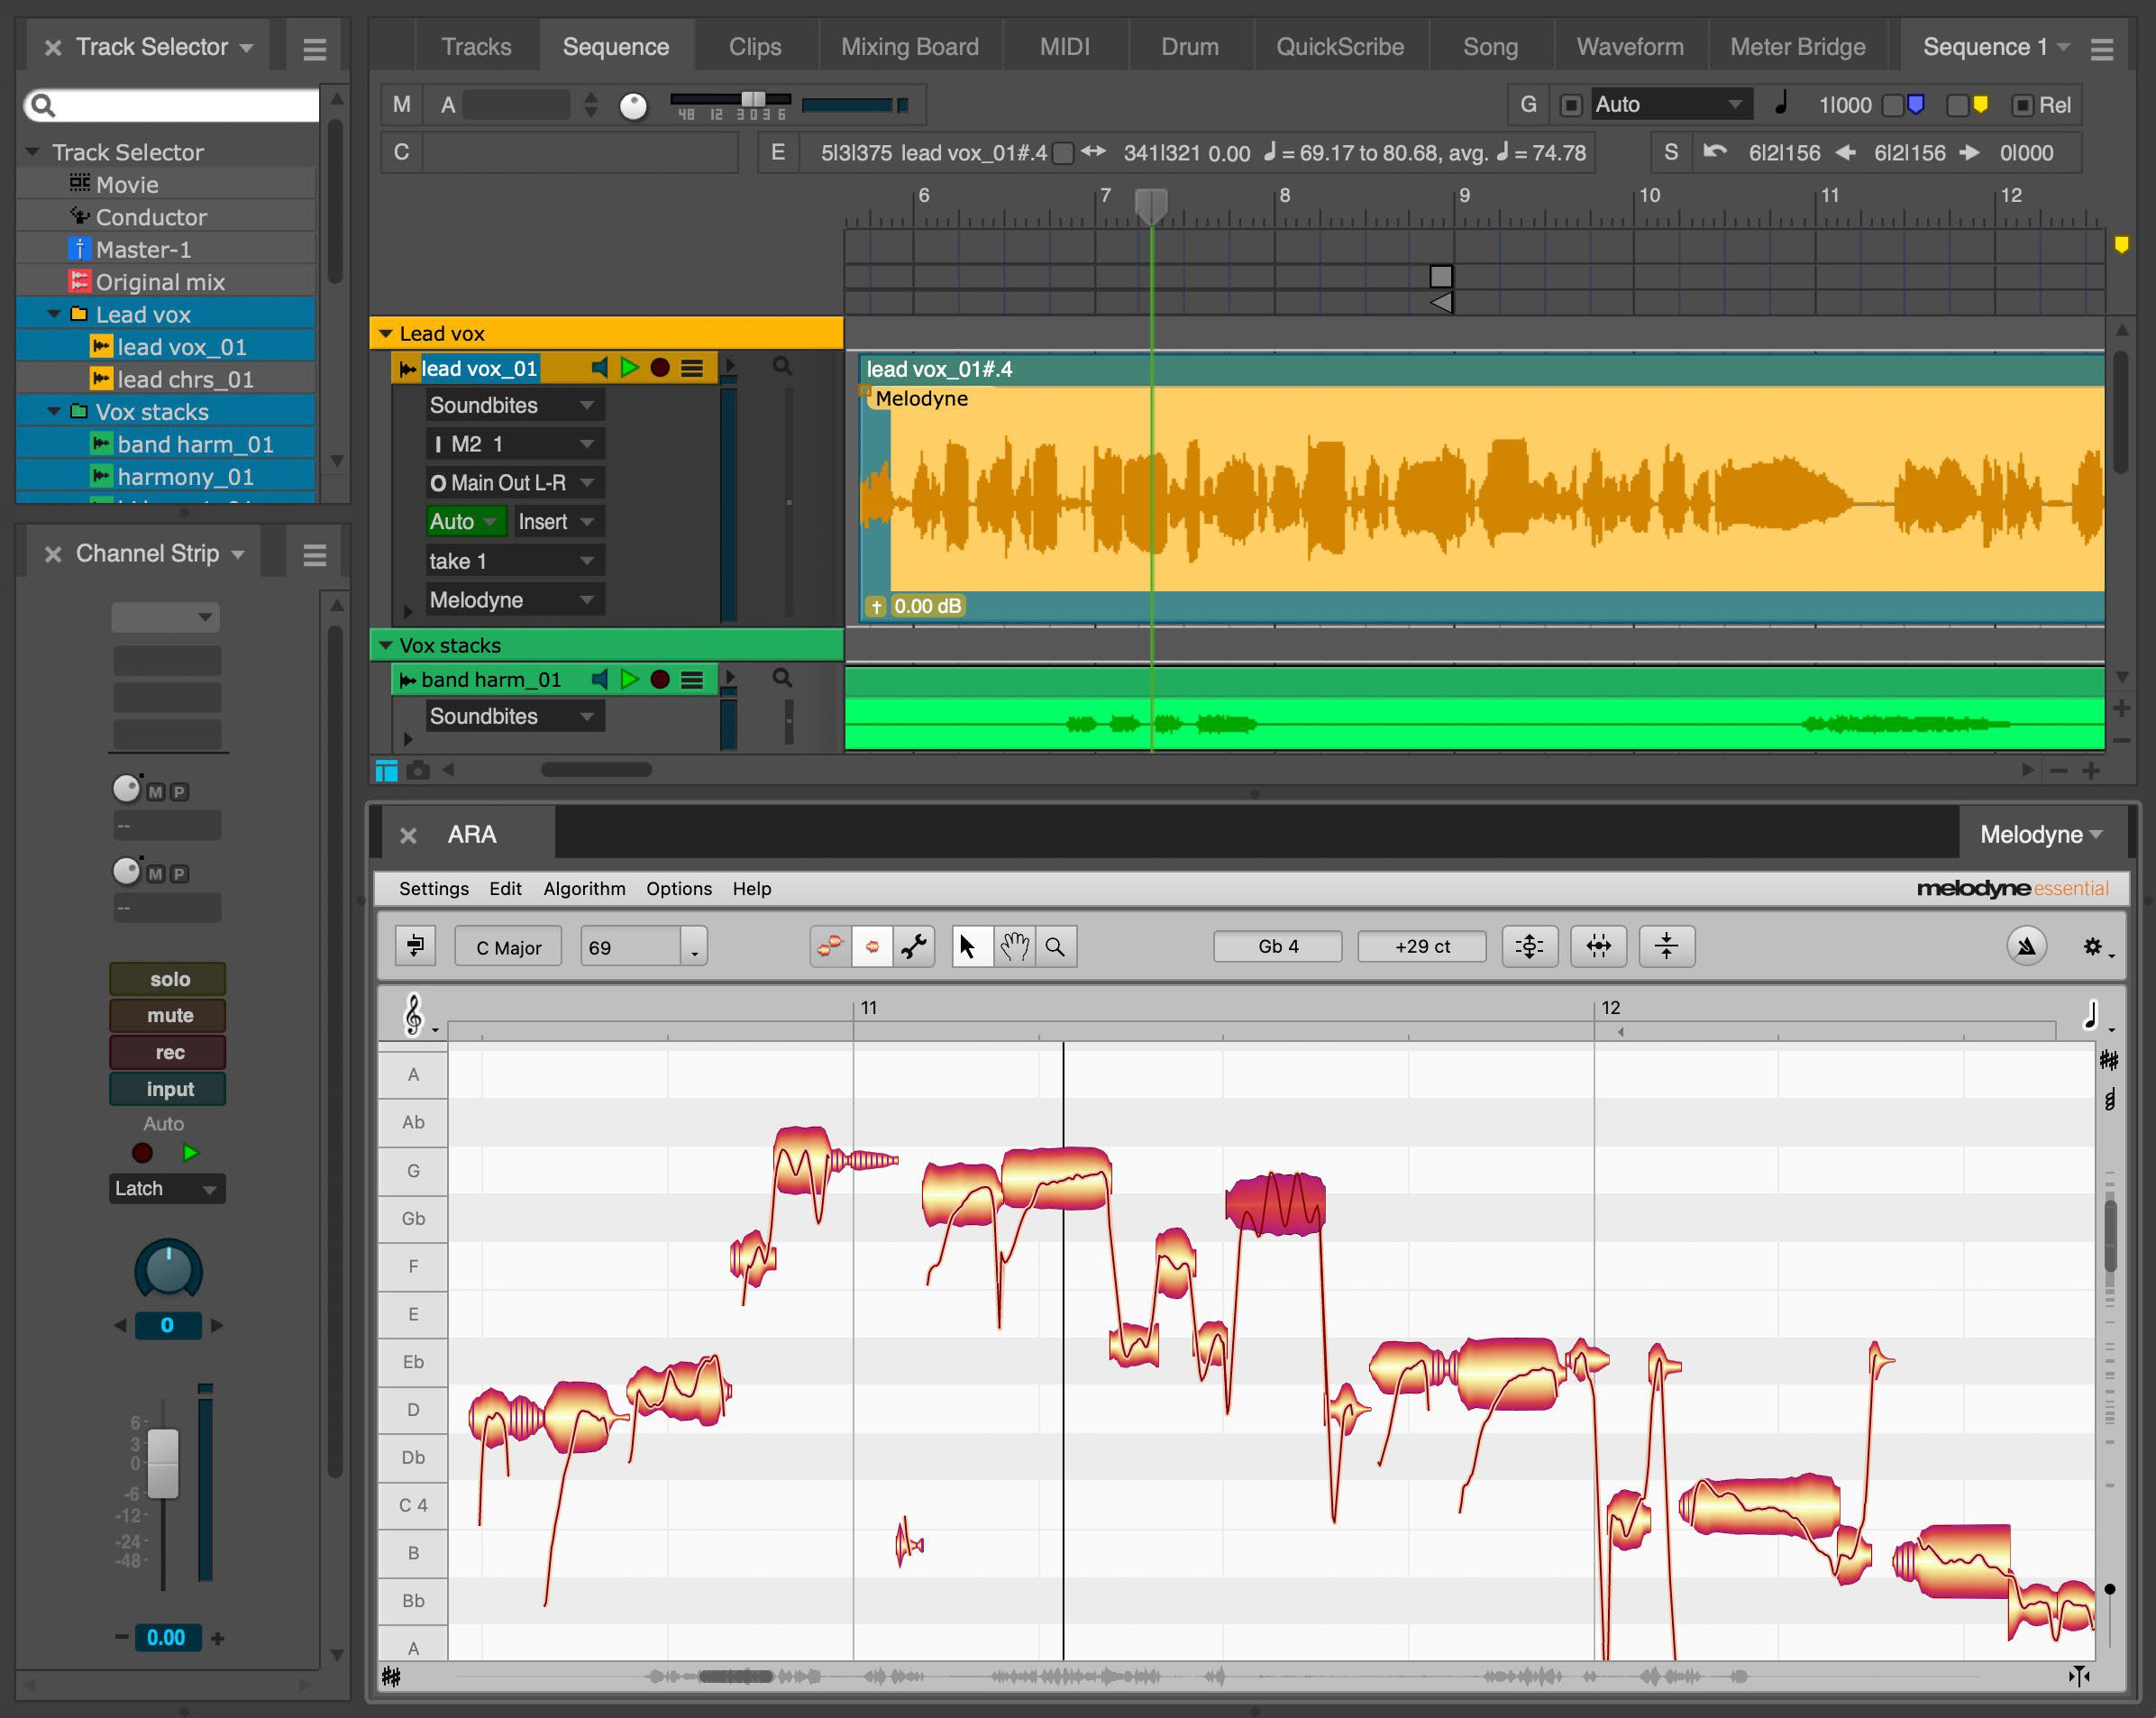 A screen shot of MOTU Digital Performer, a music editor software, displaying a waveform and various editing tools.